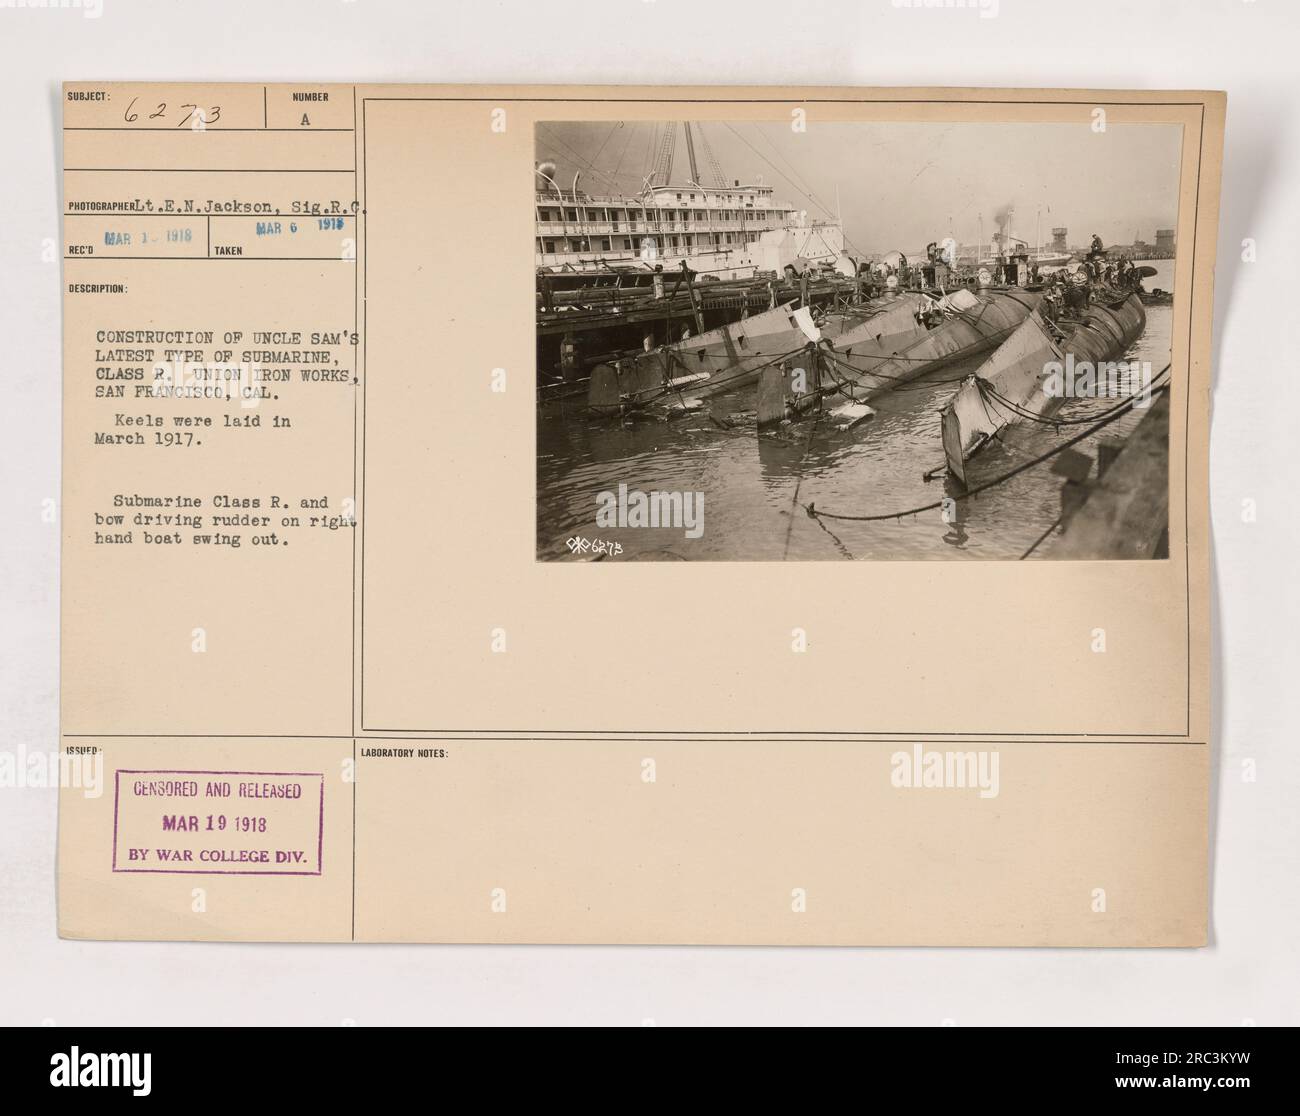 Image of construction taking place at the Union Iron Works in San Francisco. This photo showcases the building of the latest type of submarine for the United States, a Class R submarine. The keels were laid in March 1917, and the image shows the bow driving rudder on the right-hand boat swinging out. This information was censored and released by the War College Division laboratory on March 19, 1918. Stock Photo